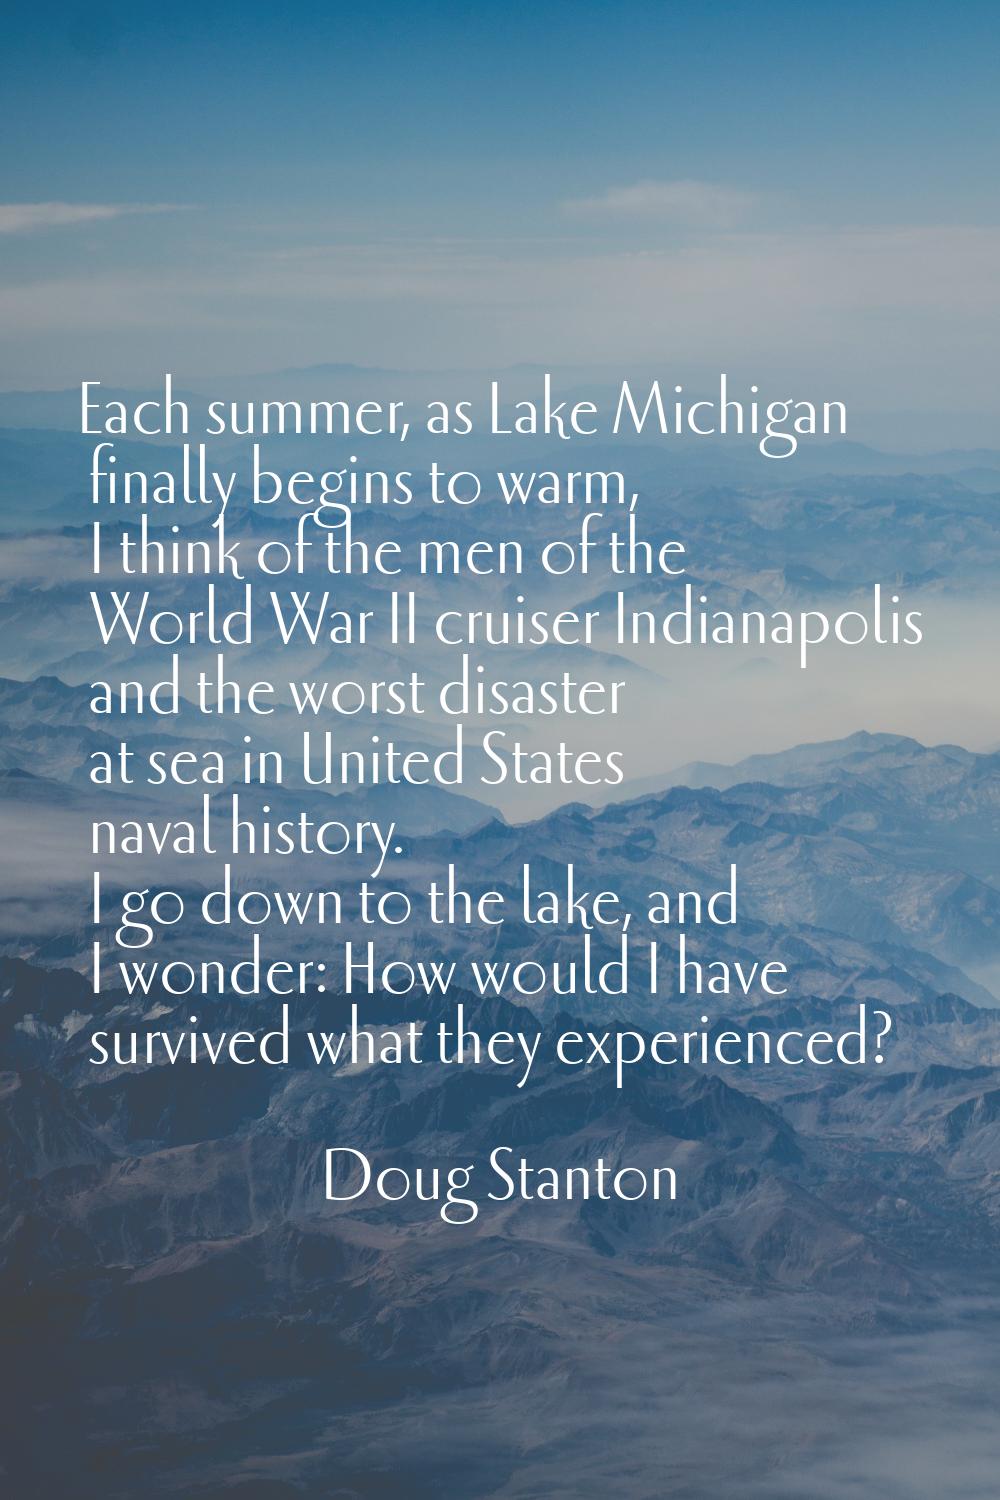 Each summer, as Lake Michigan finally begins to warm, I think of the men of the World War II cruise